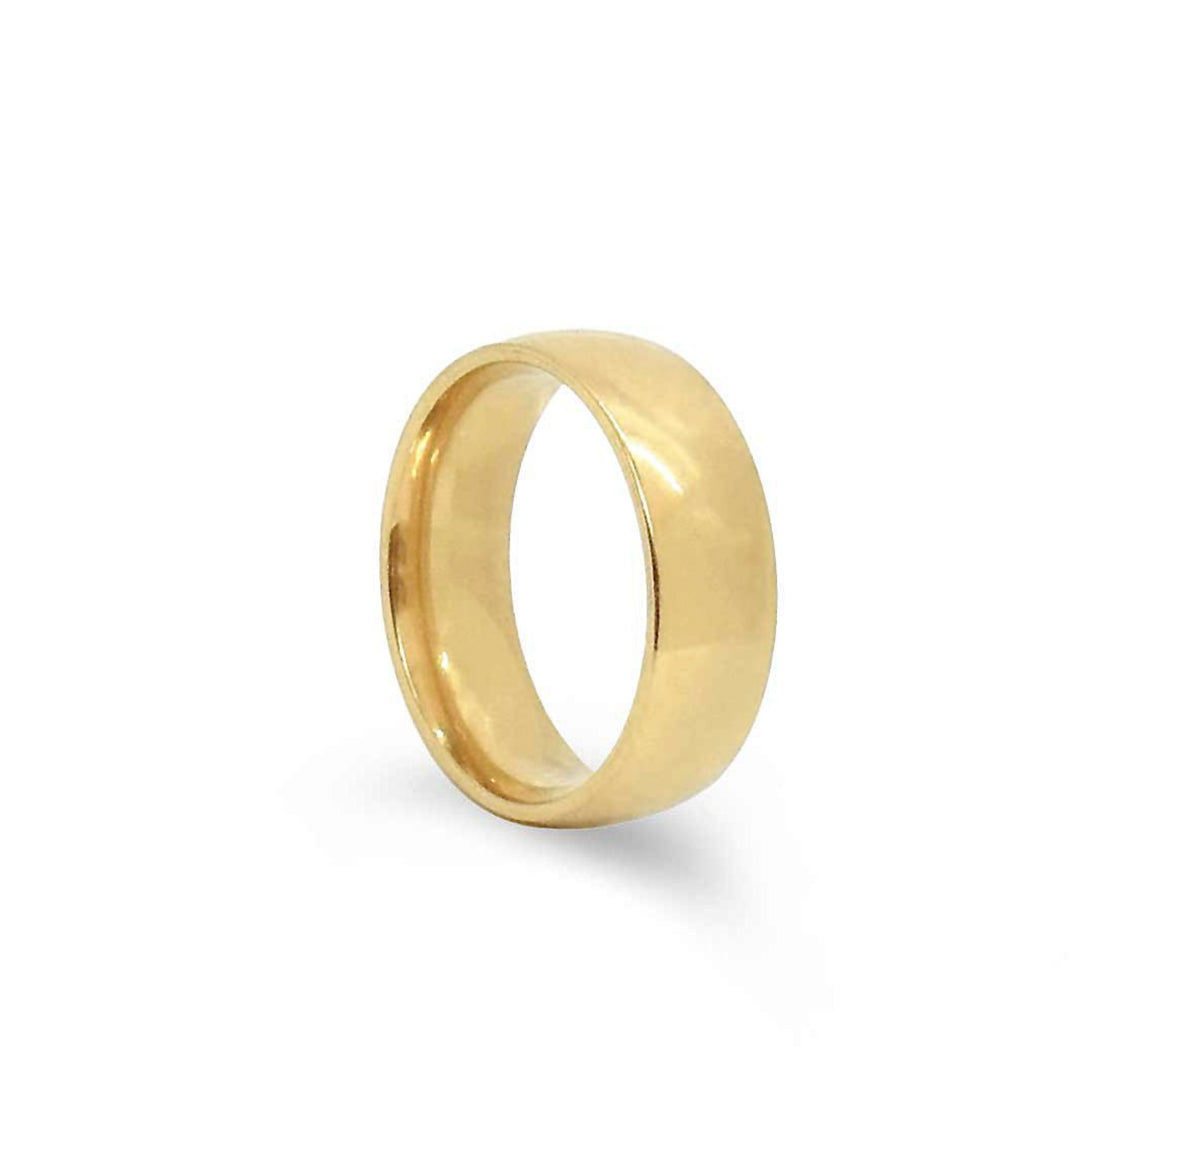 THICK GOLD RING BAND